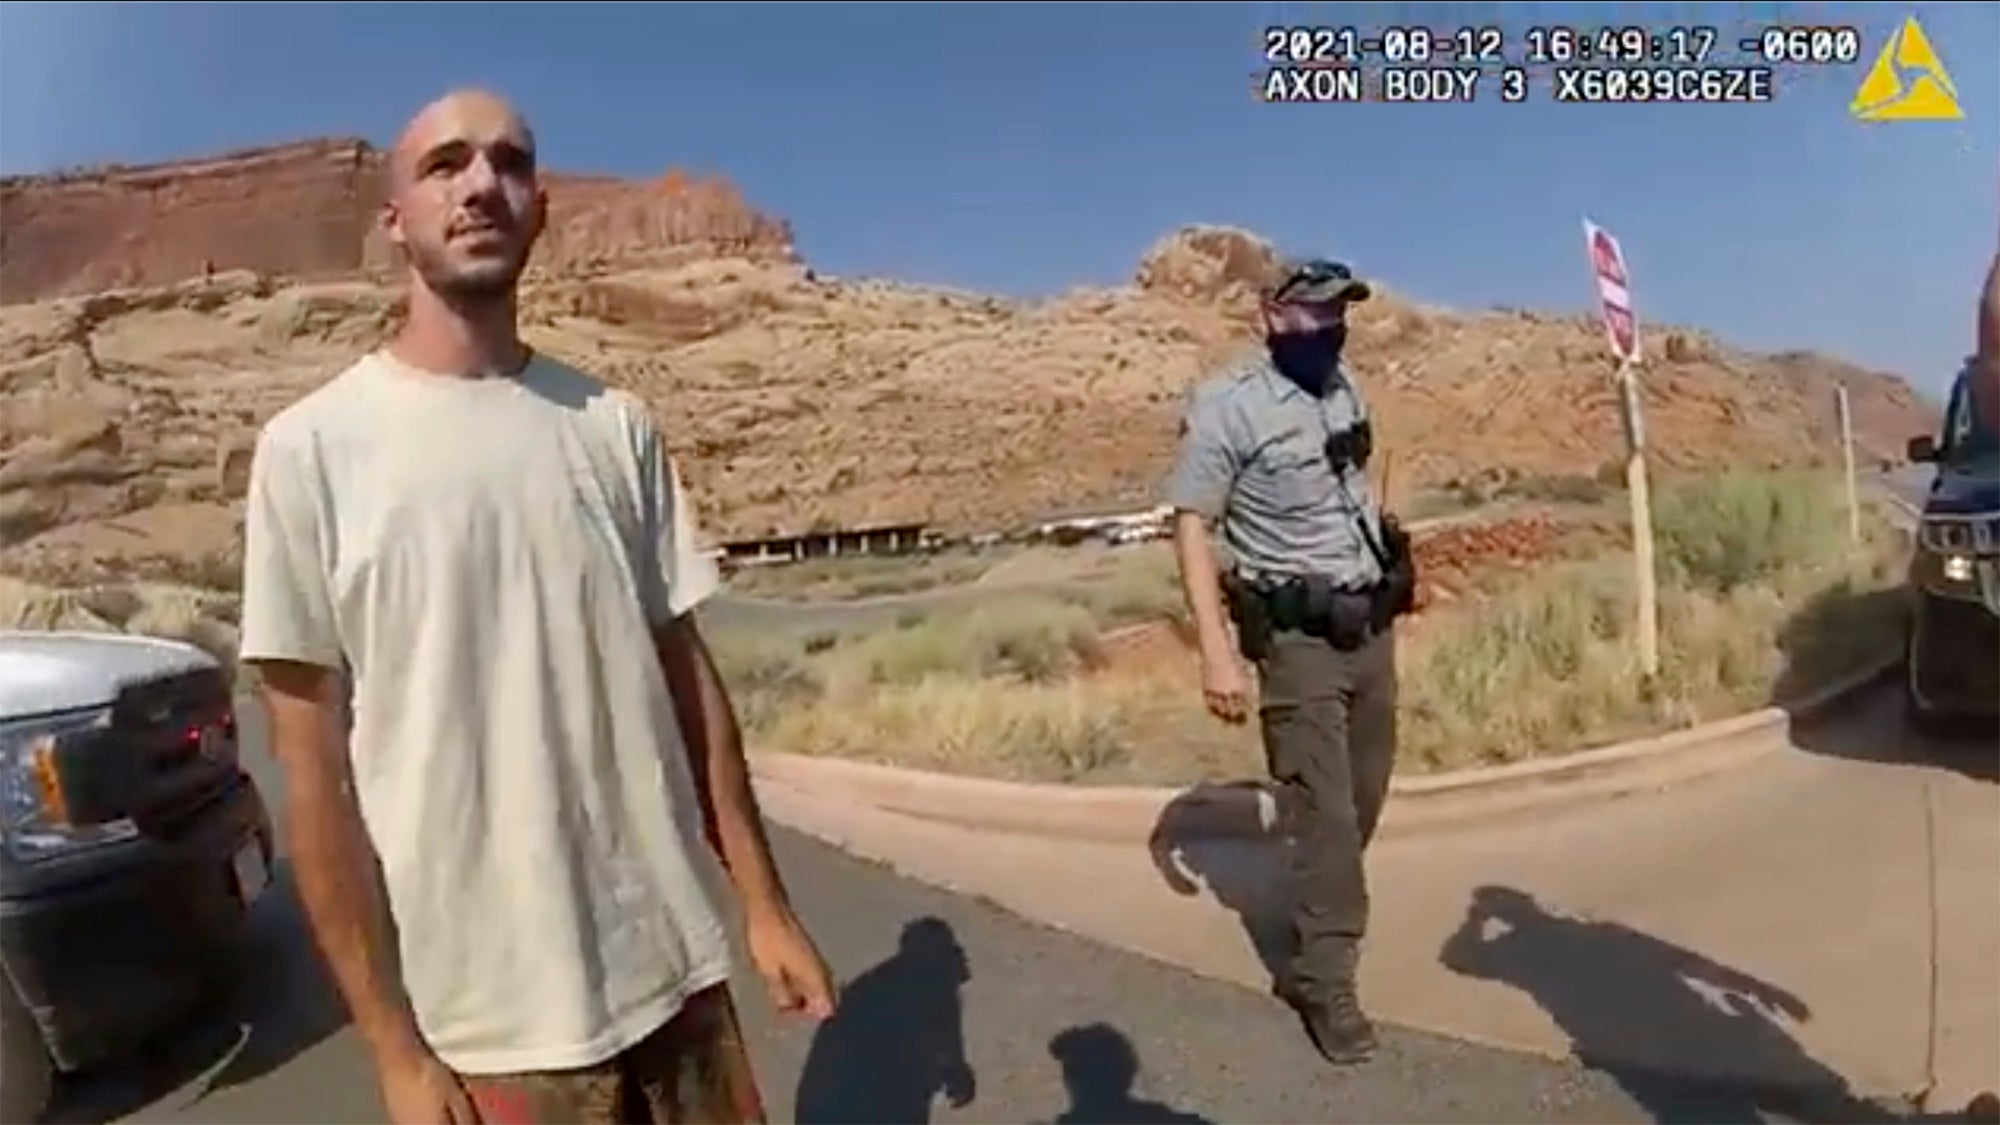 In this image taken from police body camera video provided by the Moab Police Department, Brian Laundrie talks to a police officer after police pulled over the van he was traveling in with his girlfriend, Gabrielle Petito, near the entrance to Arches National Park in Utah on Aug. 12, 2021